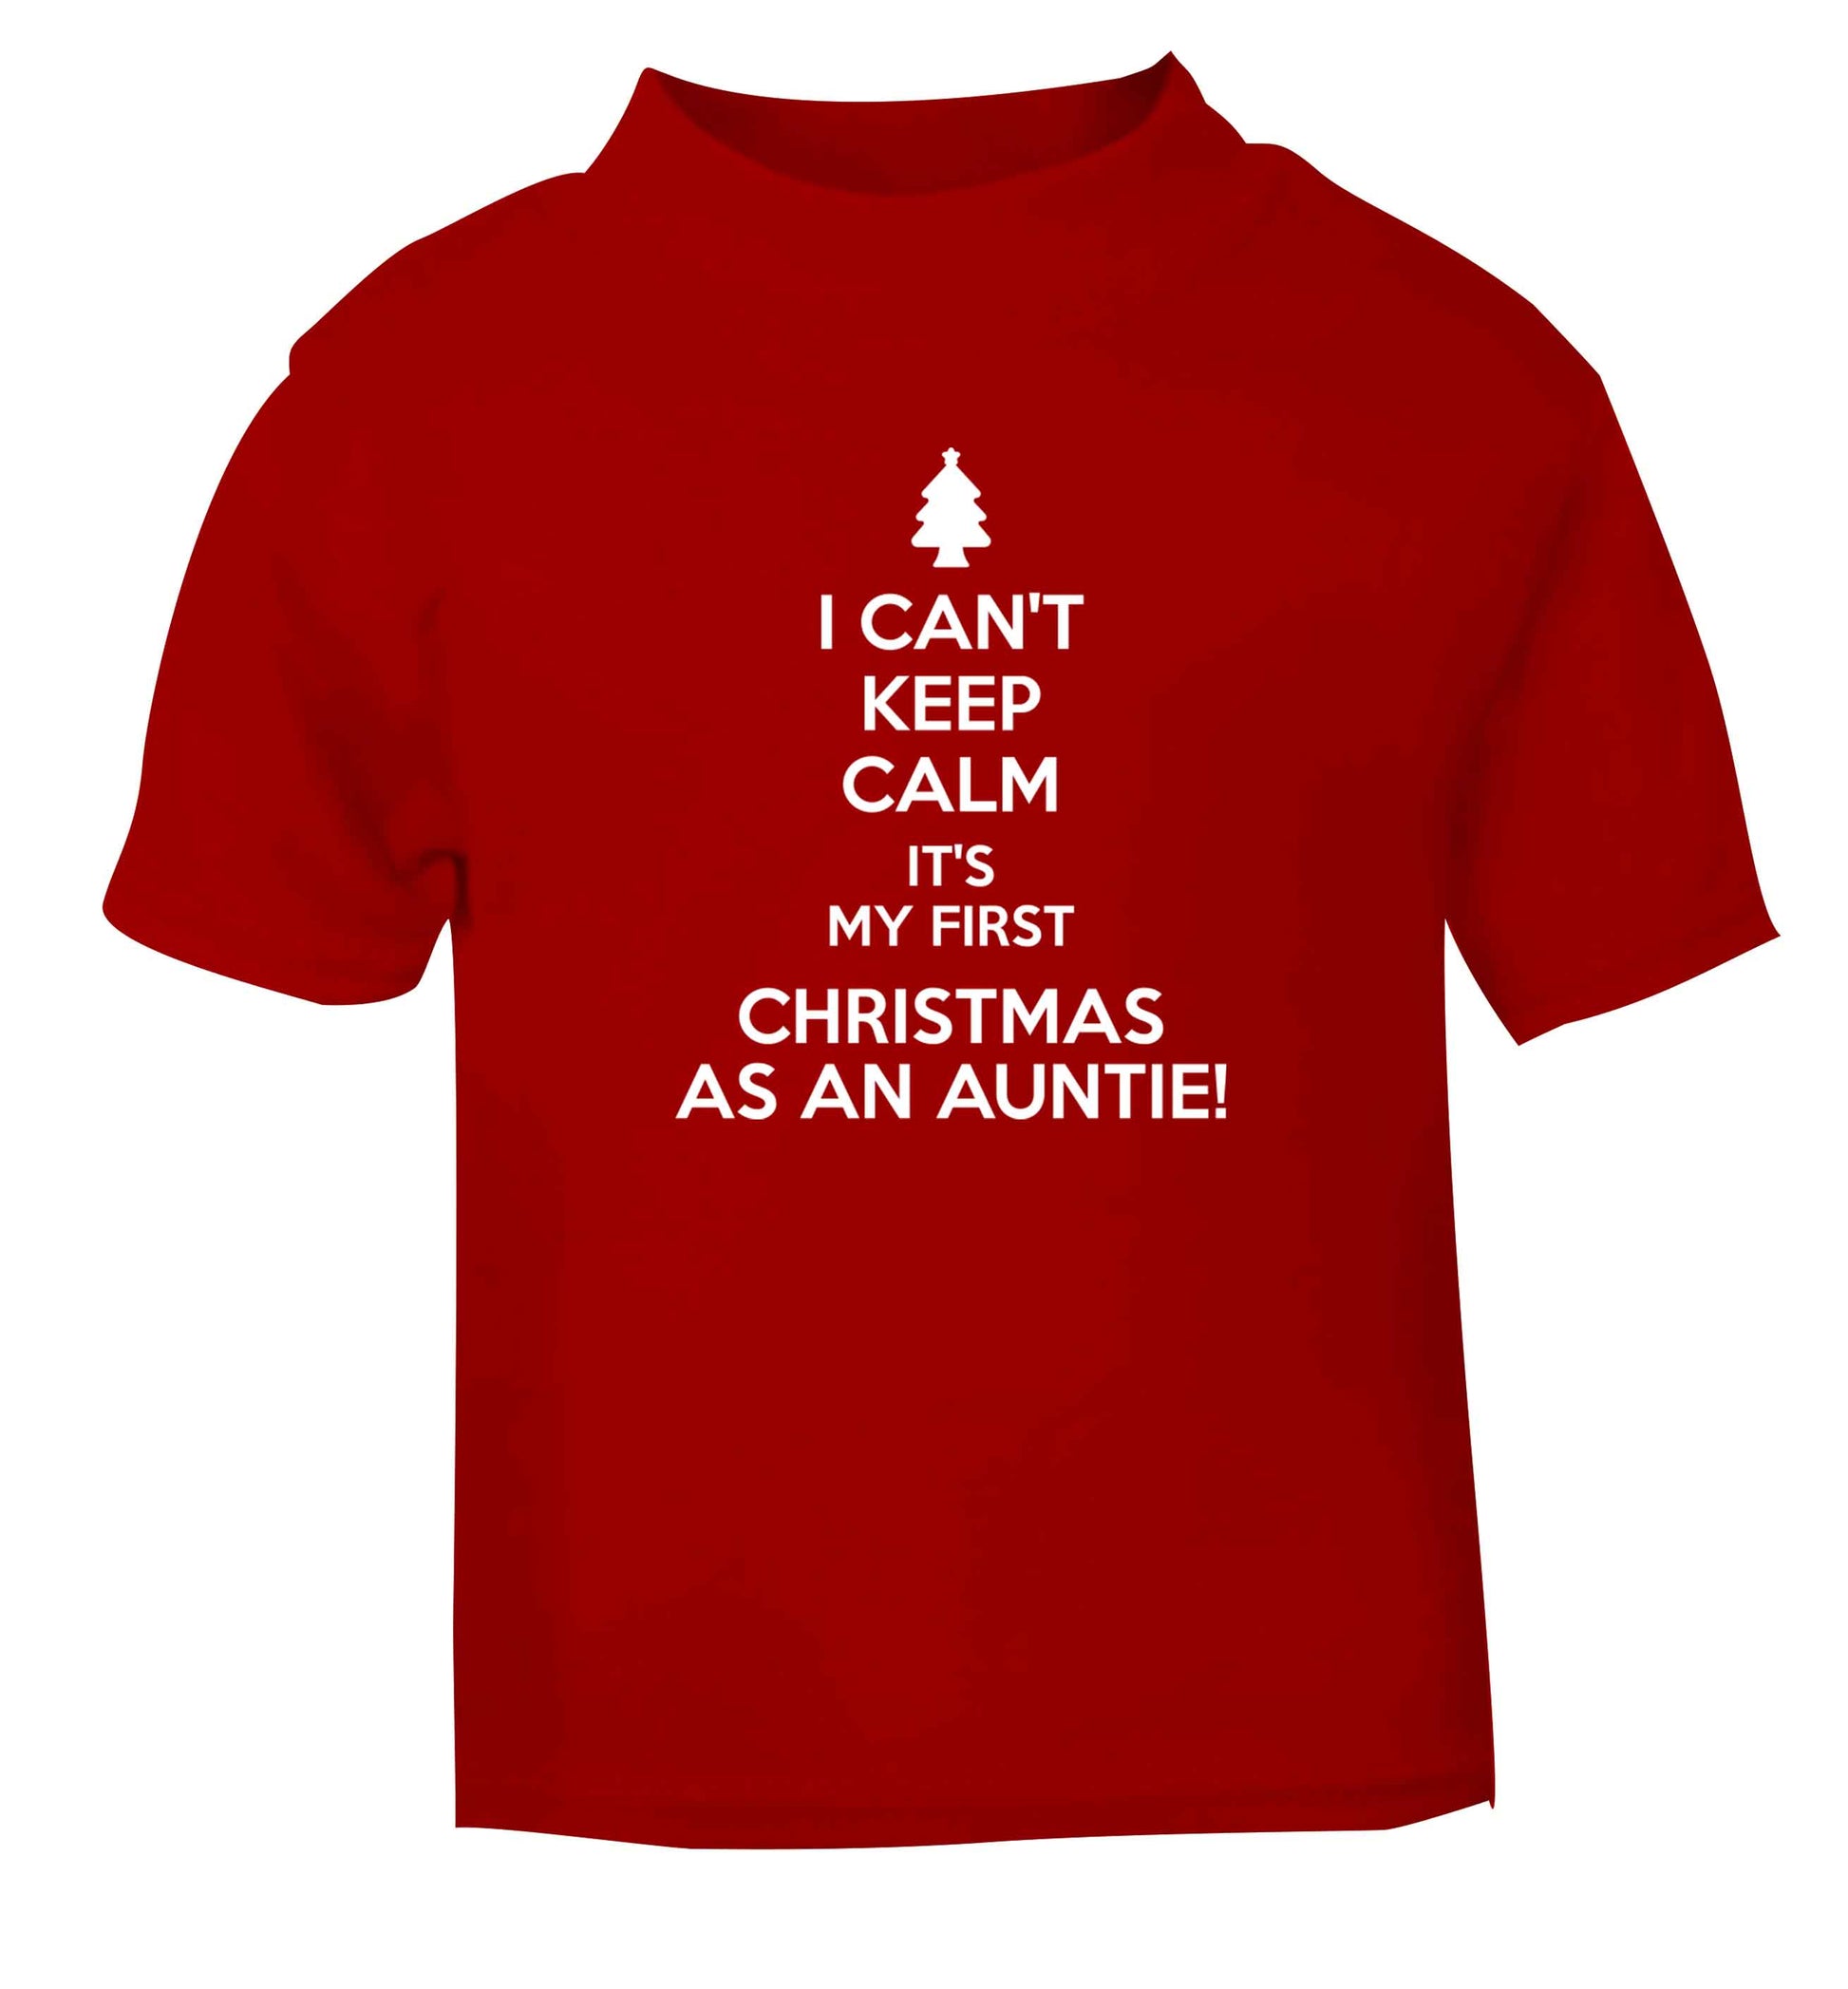 I can't keep calm it's my first Christmas as an auntie! red Baby Toddler Tshirt 2 Years